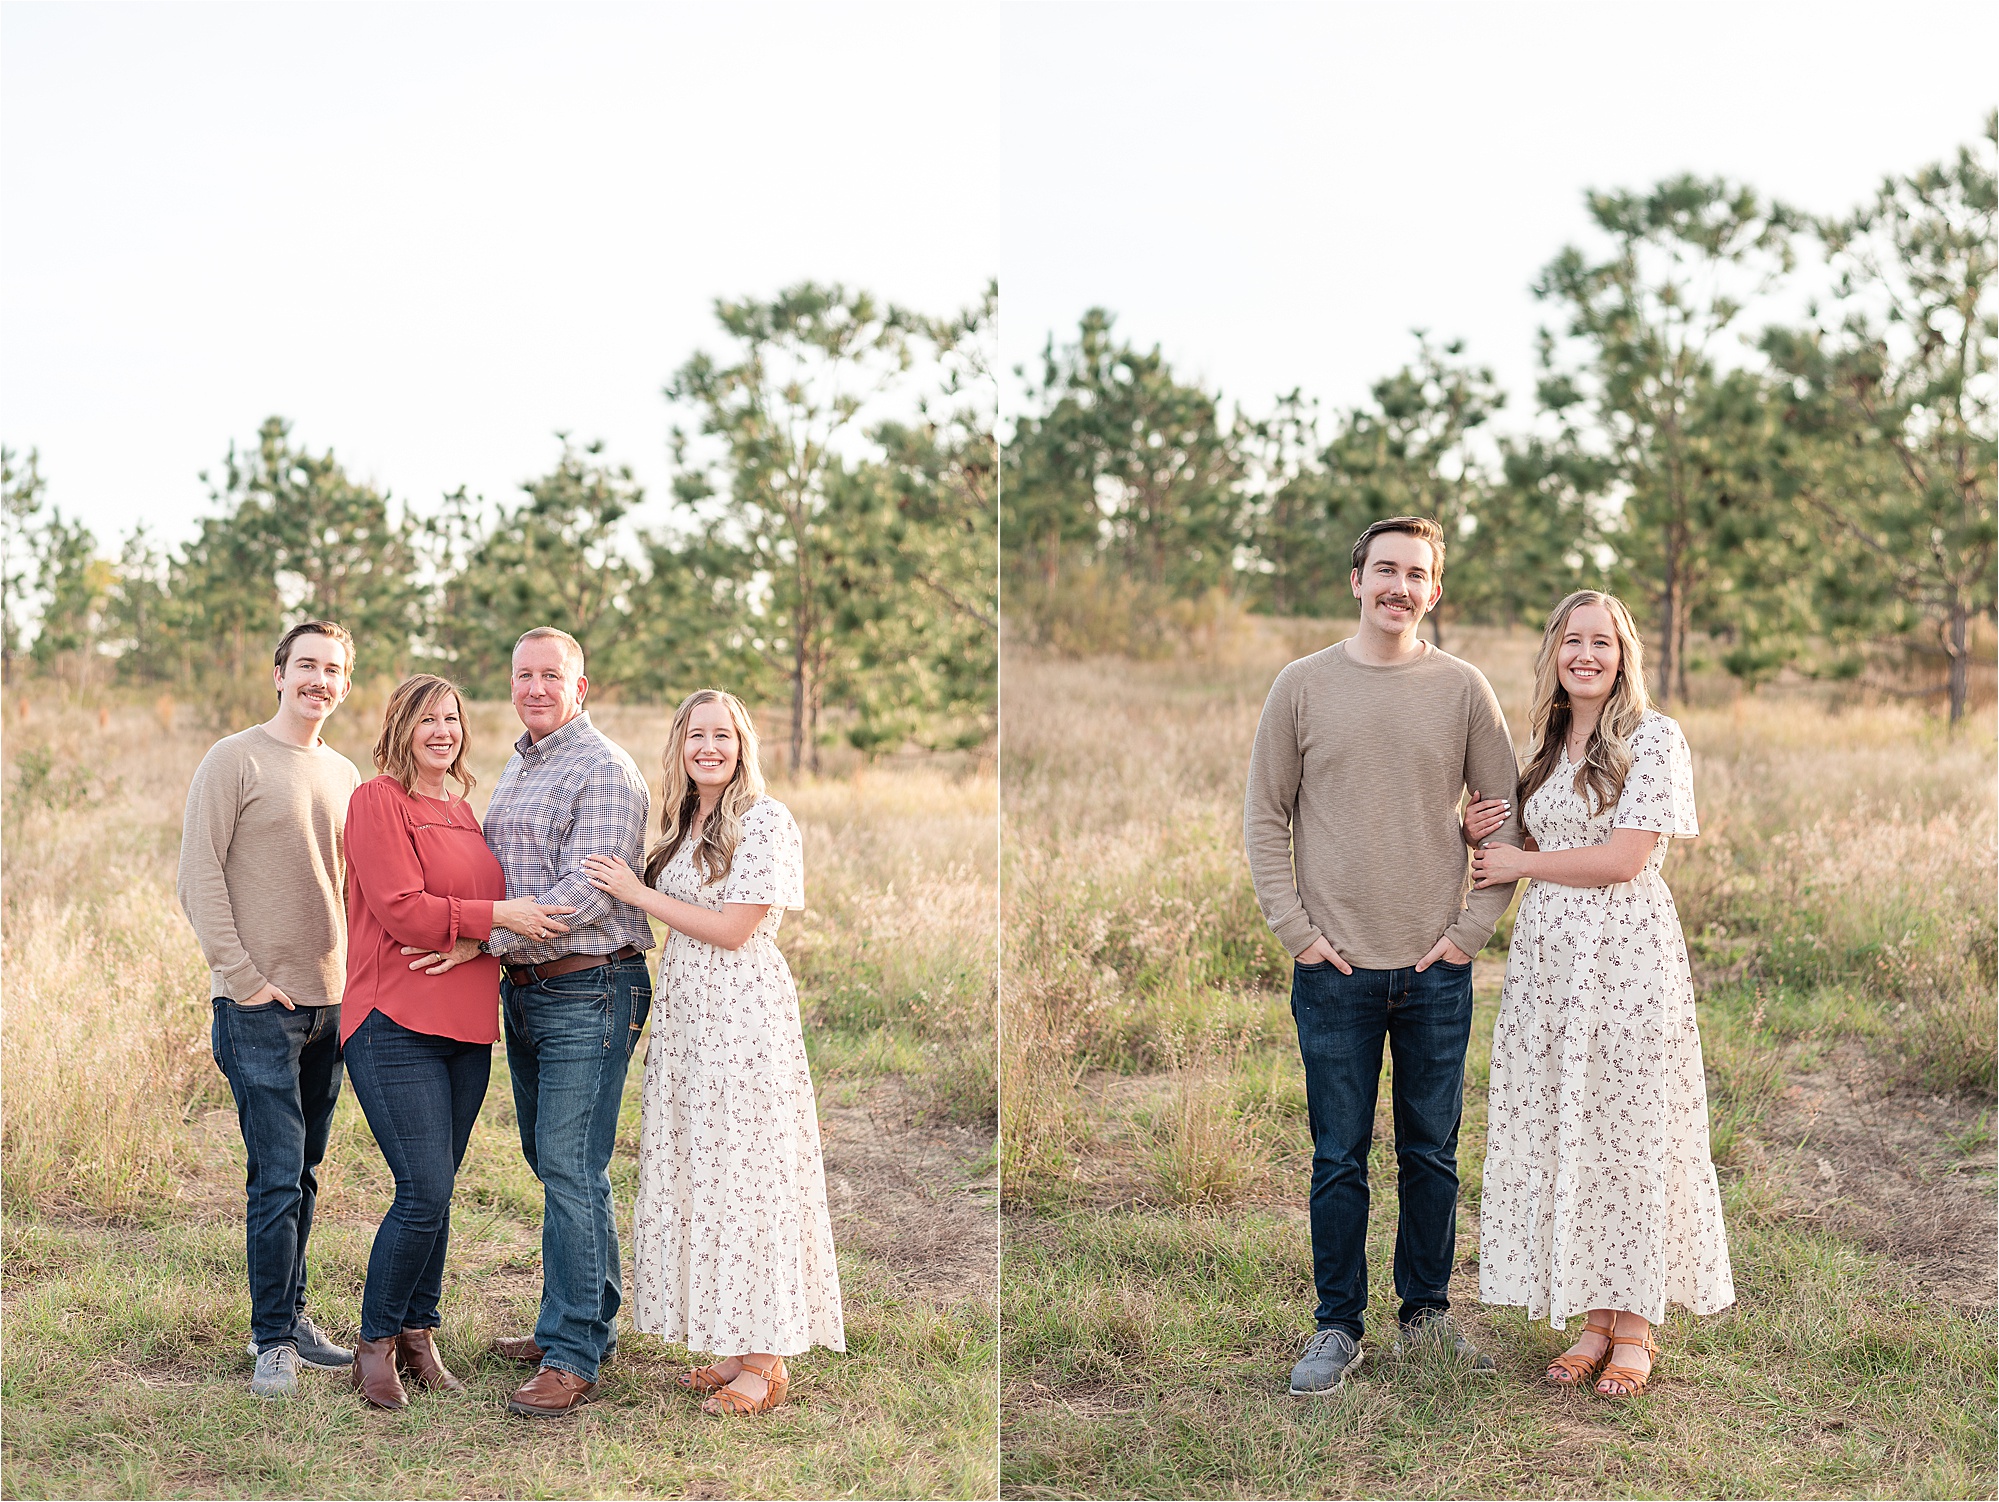 Extended Family Photos at Lake Louisa State Park, FL